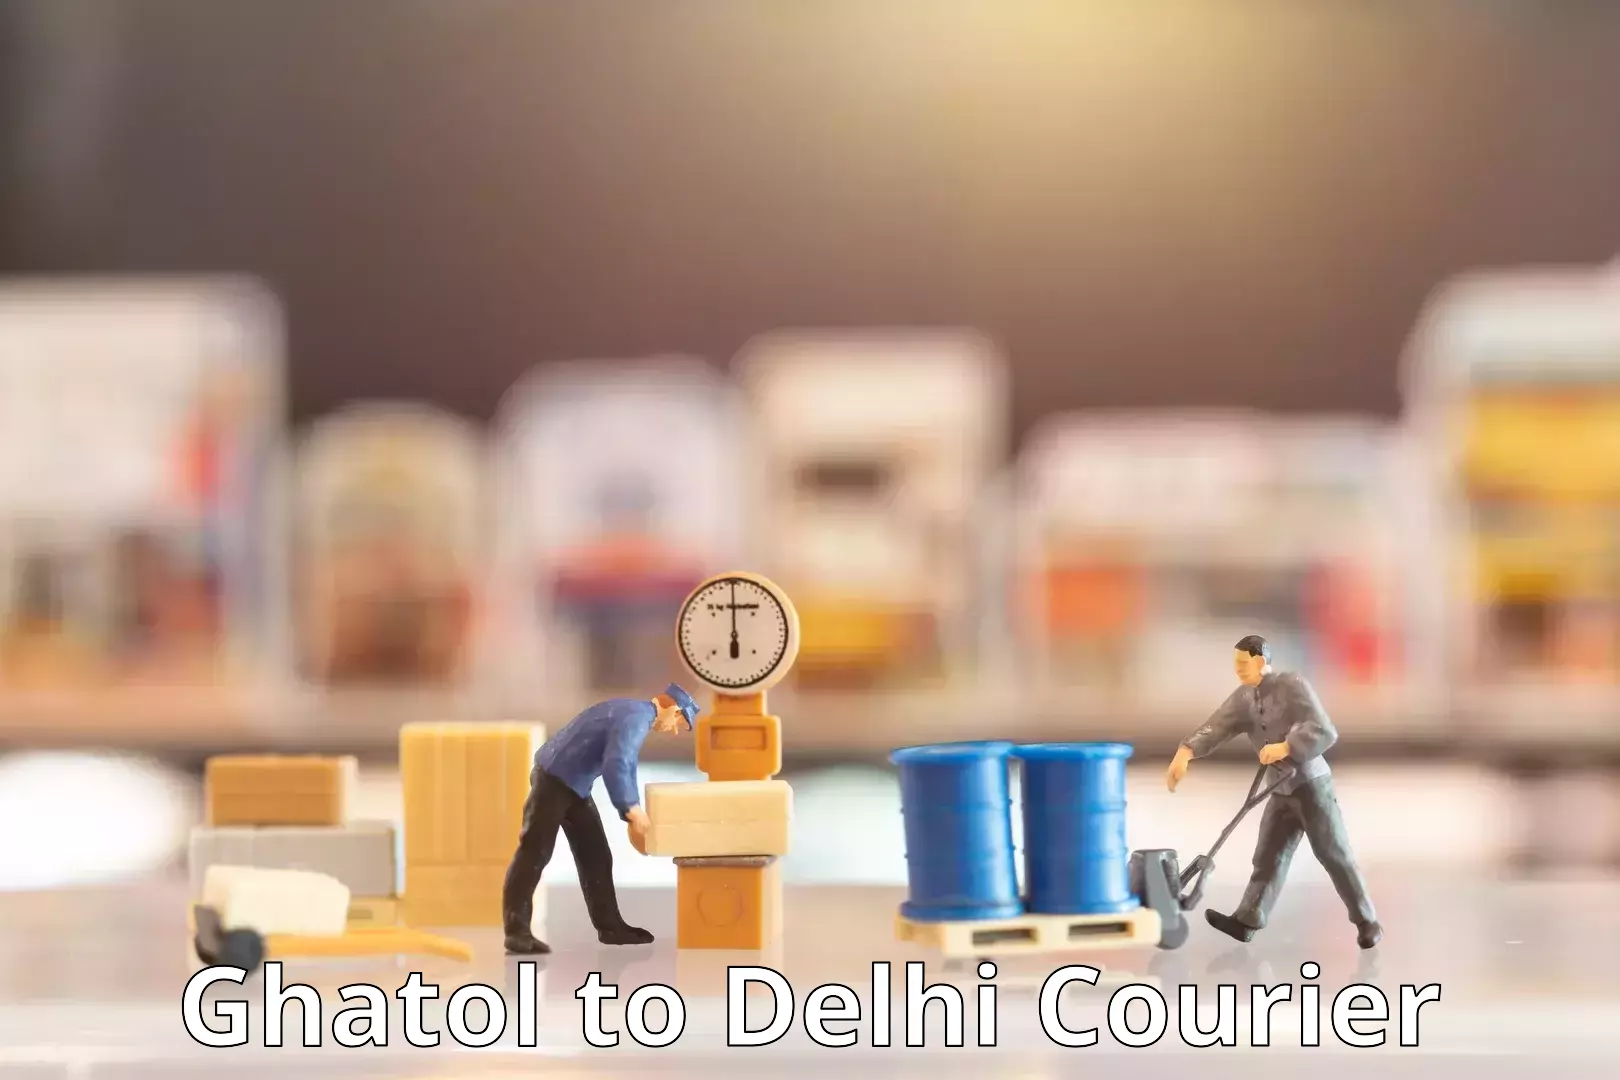 Courier service partnerships Ghatol to Lodhi Road